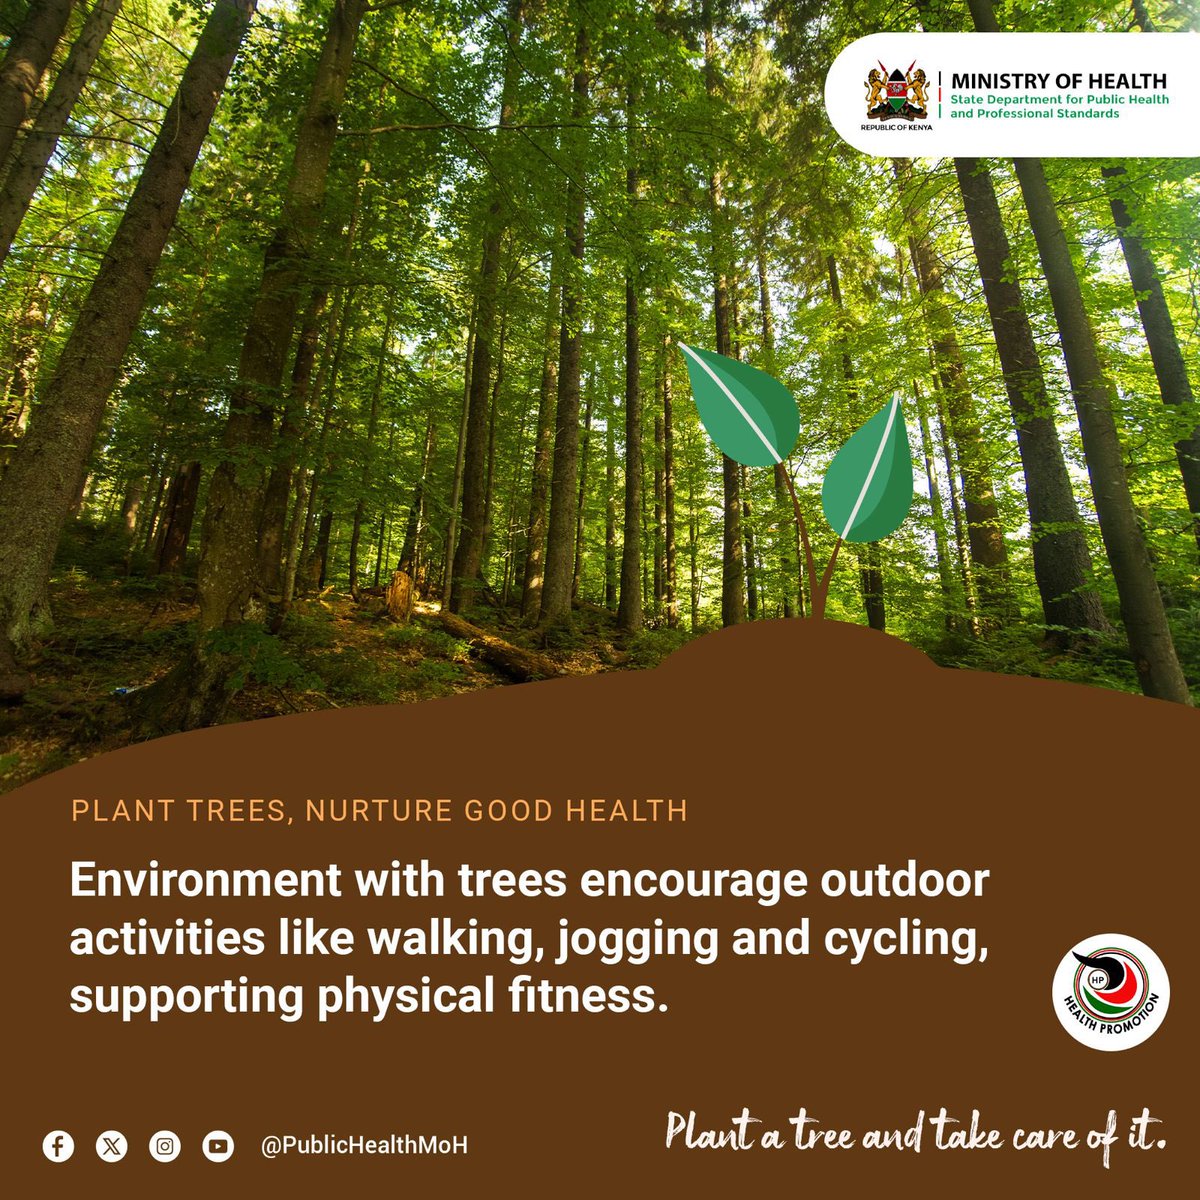 Trees are more than just greenery; they're the guardians of our planet. Let's celebrate their beauty and vital role in purifying the air we breathe. Plant a tree today and secure a greener tomorrow!